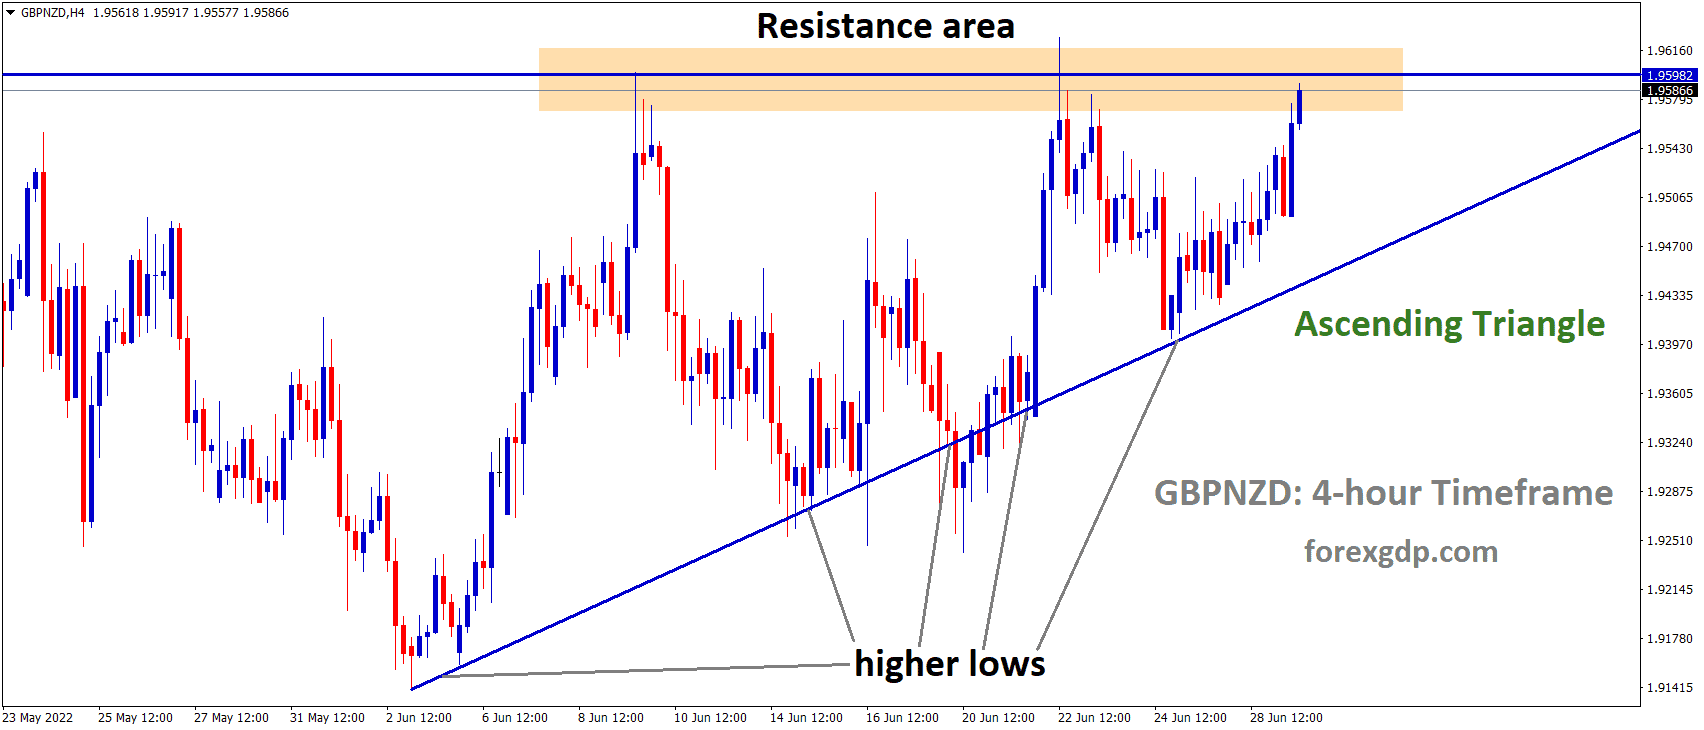 GBPNZD is moving in an Ascending triangle pattern and the Market has reached the horizontal resistance area of the Pattern